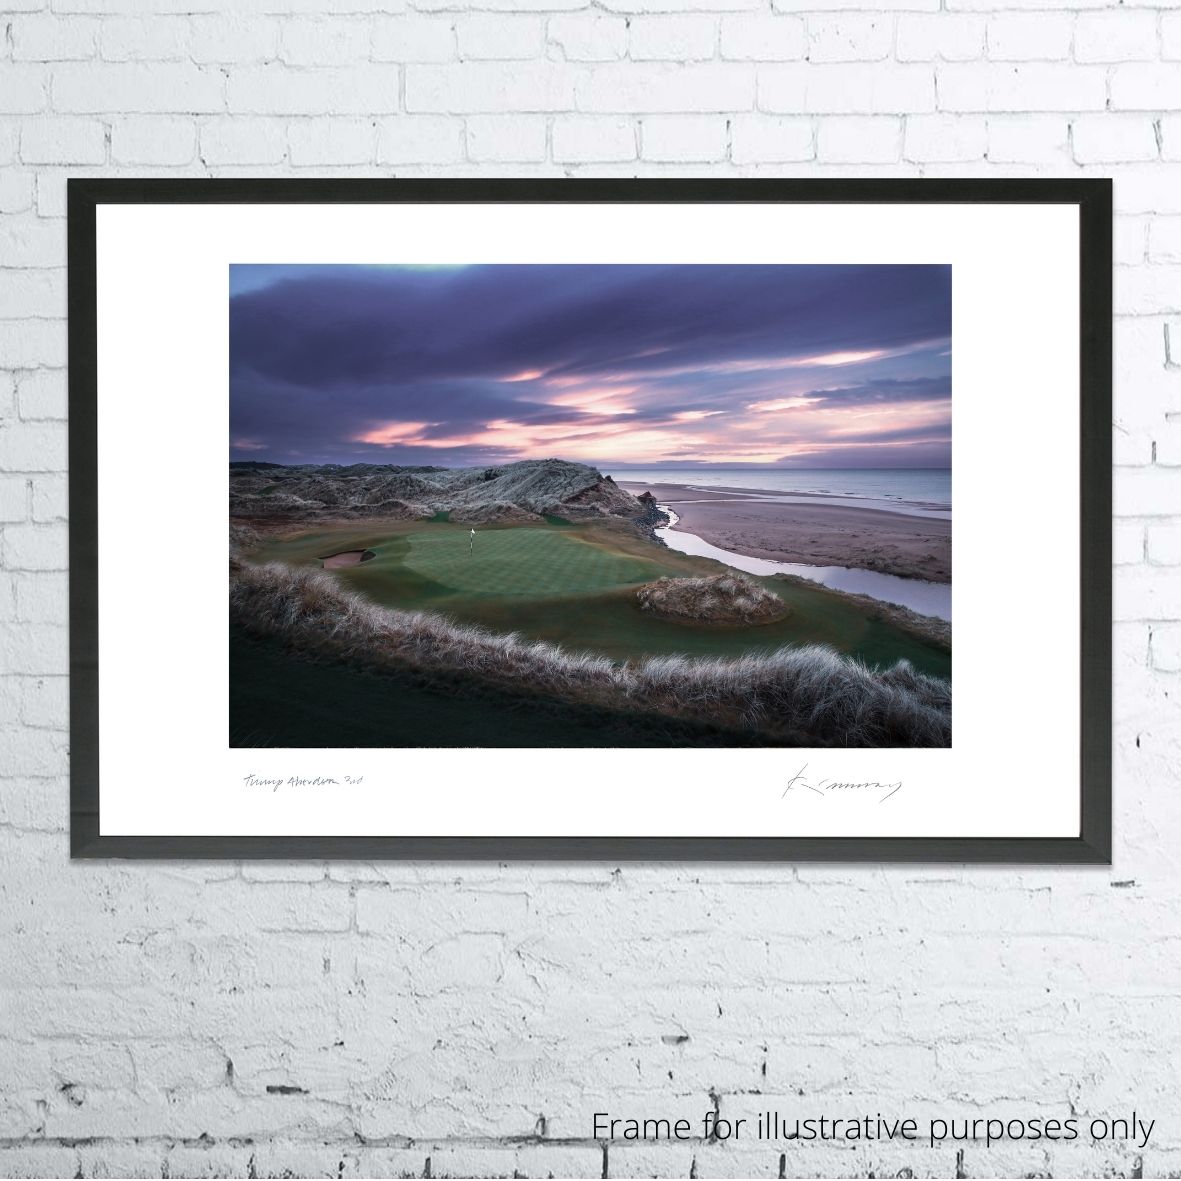 A framed photo of the 3rd at Trump Aberdeen by Kevin Murray.